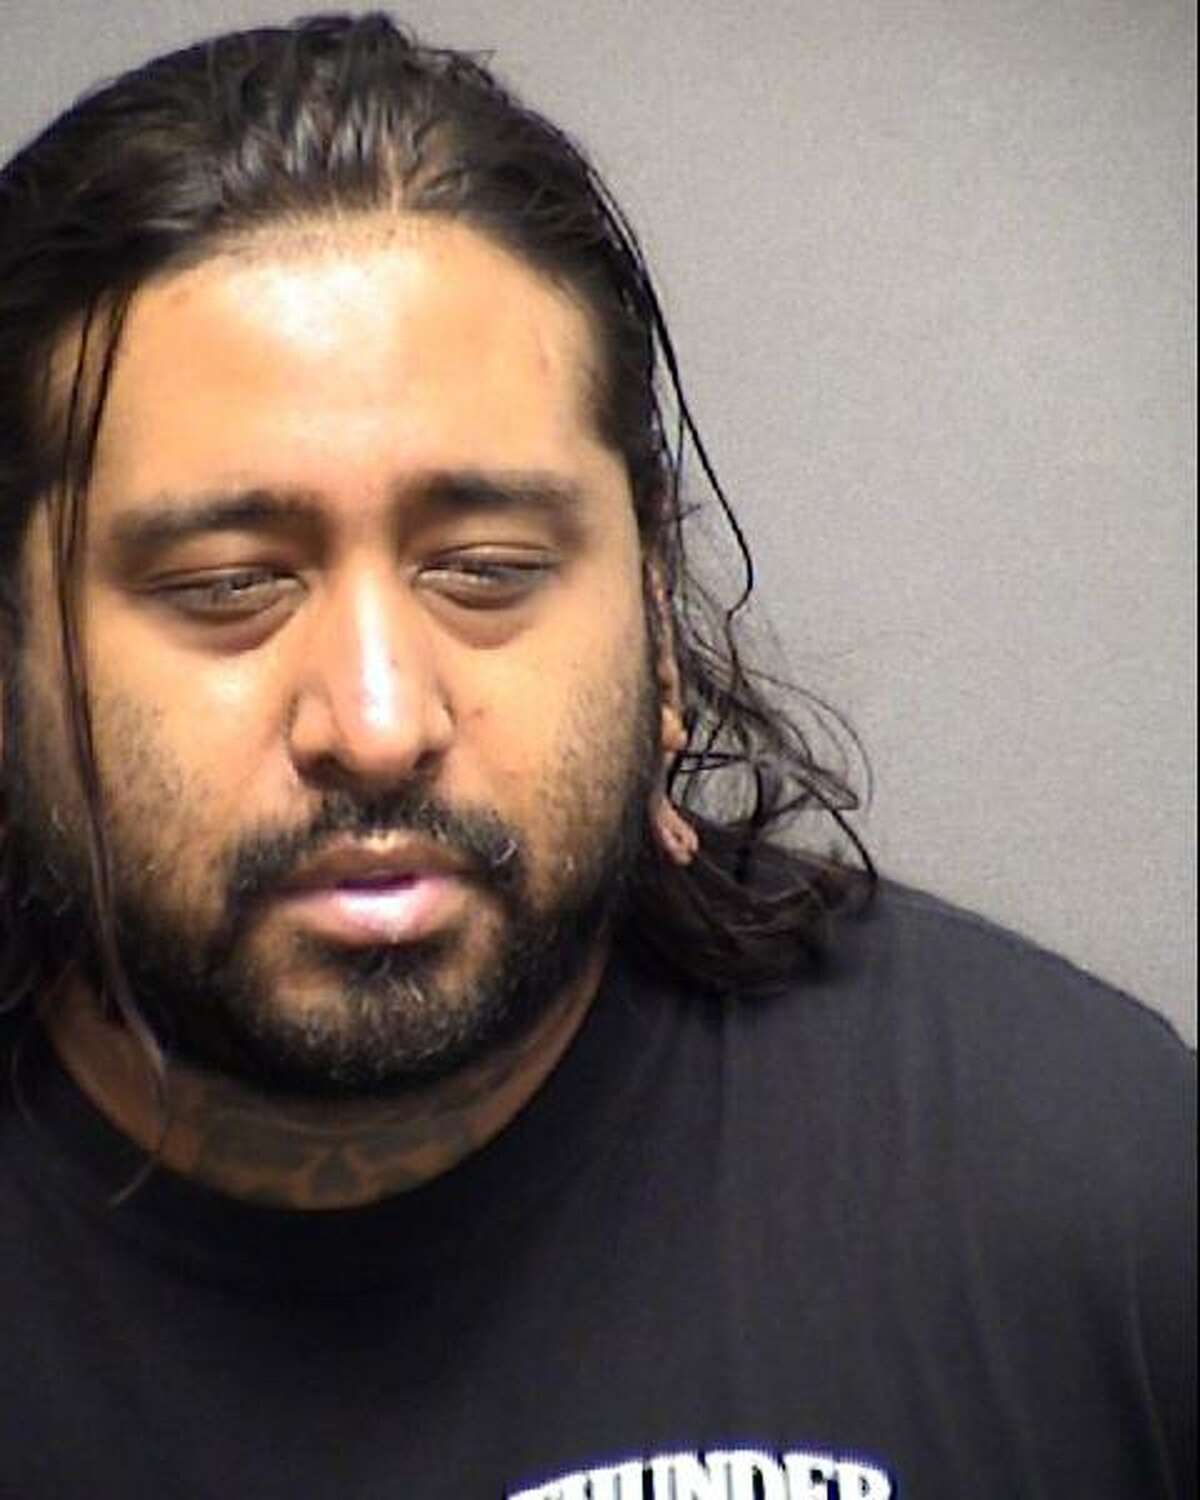 Felix Hernandez, 30, was charged on Thursday, Feb. 10, with murder in connection with the Jan. 22 fatal shooting of Victoria Stampley.